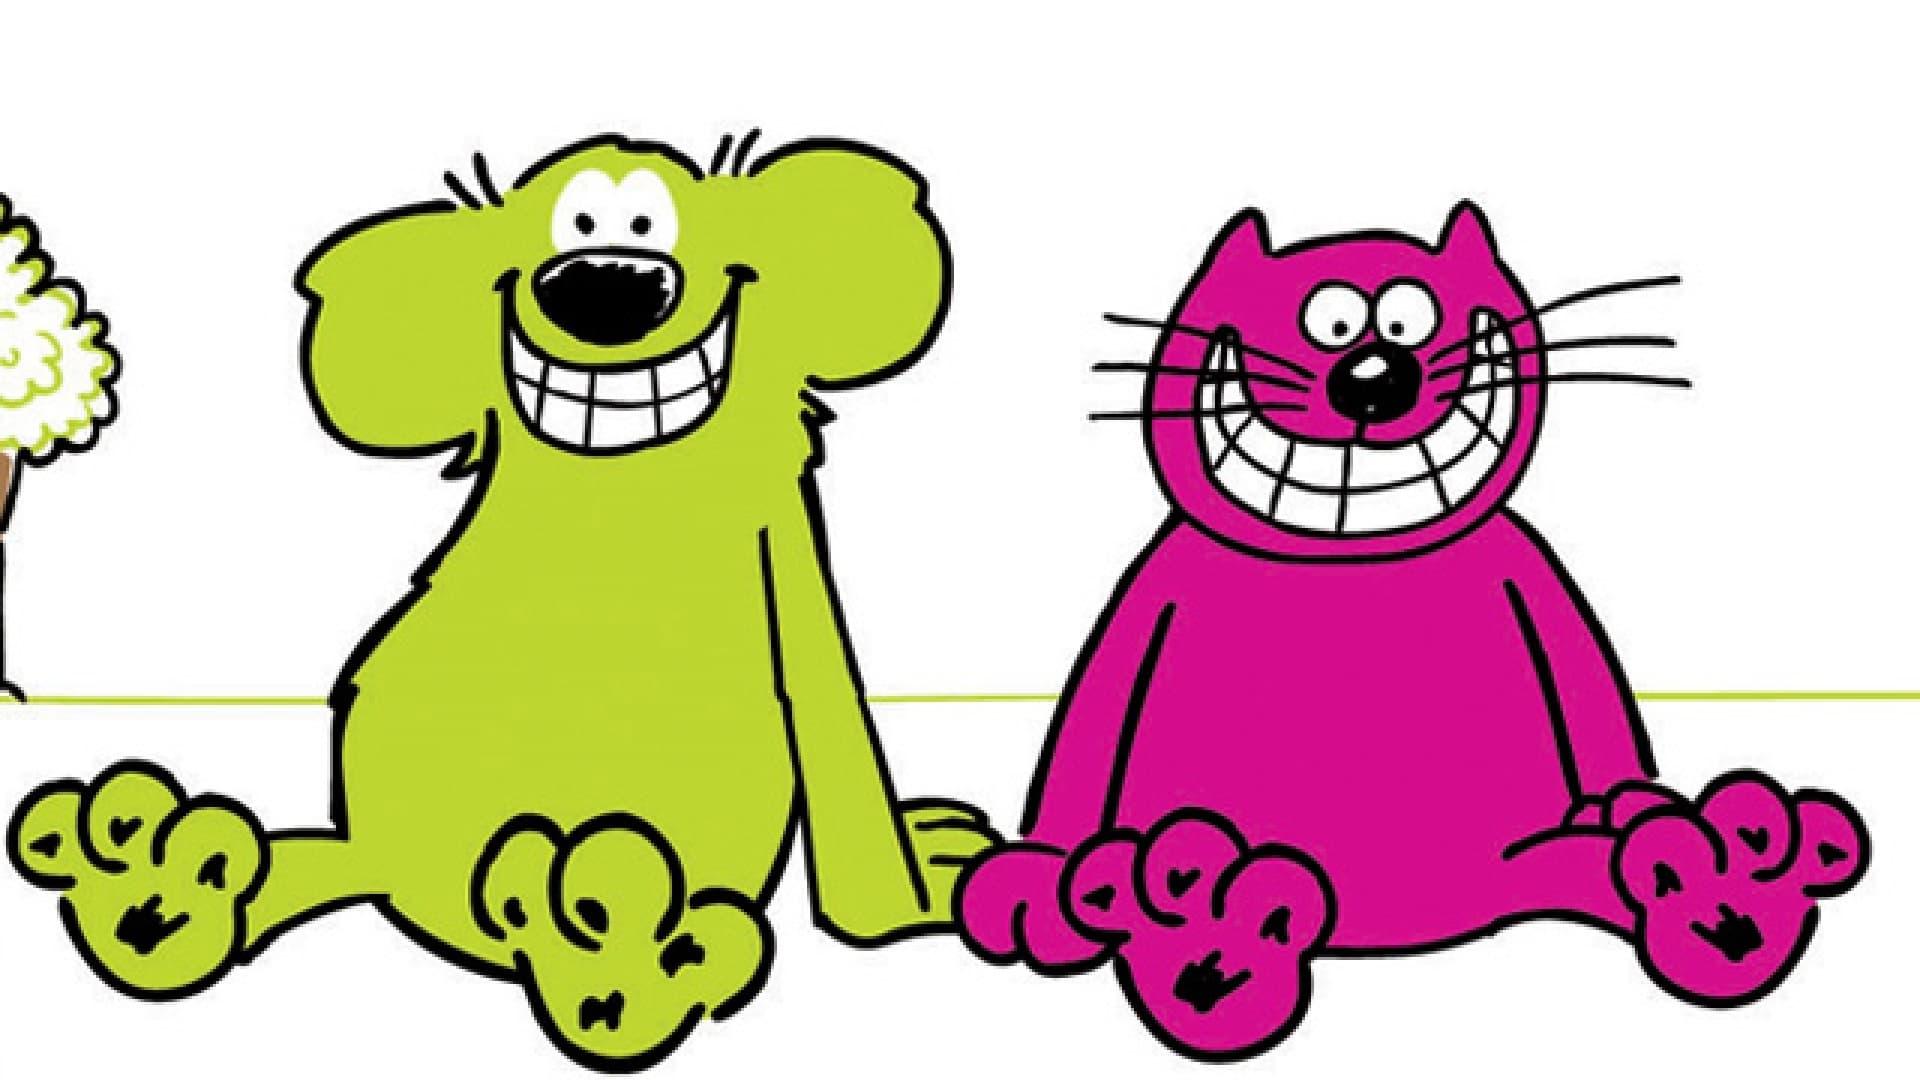 Roobarb backdrop